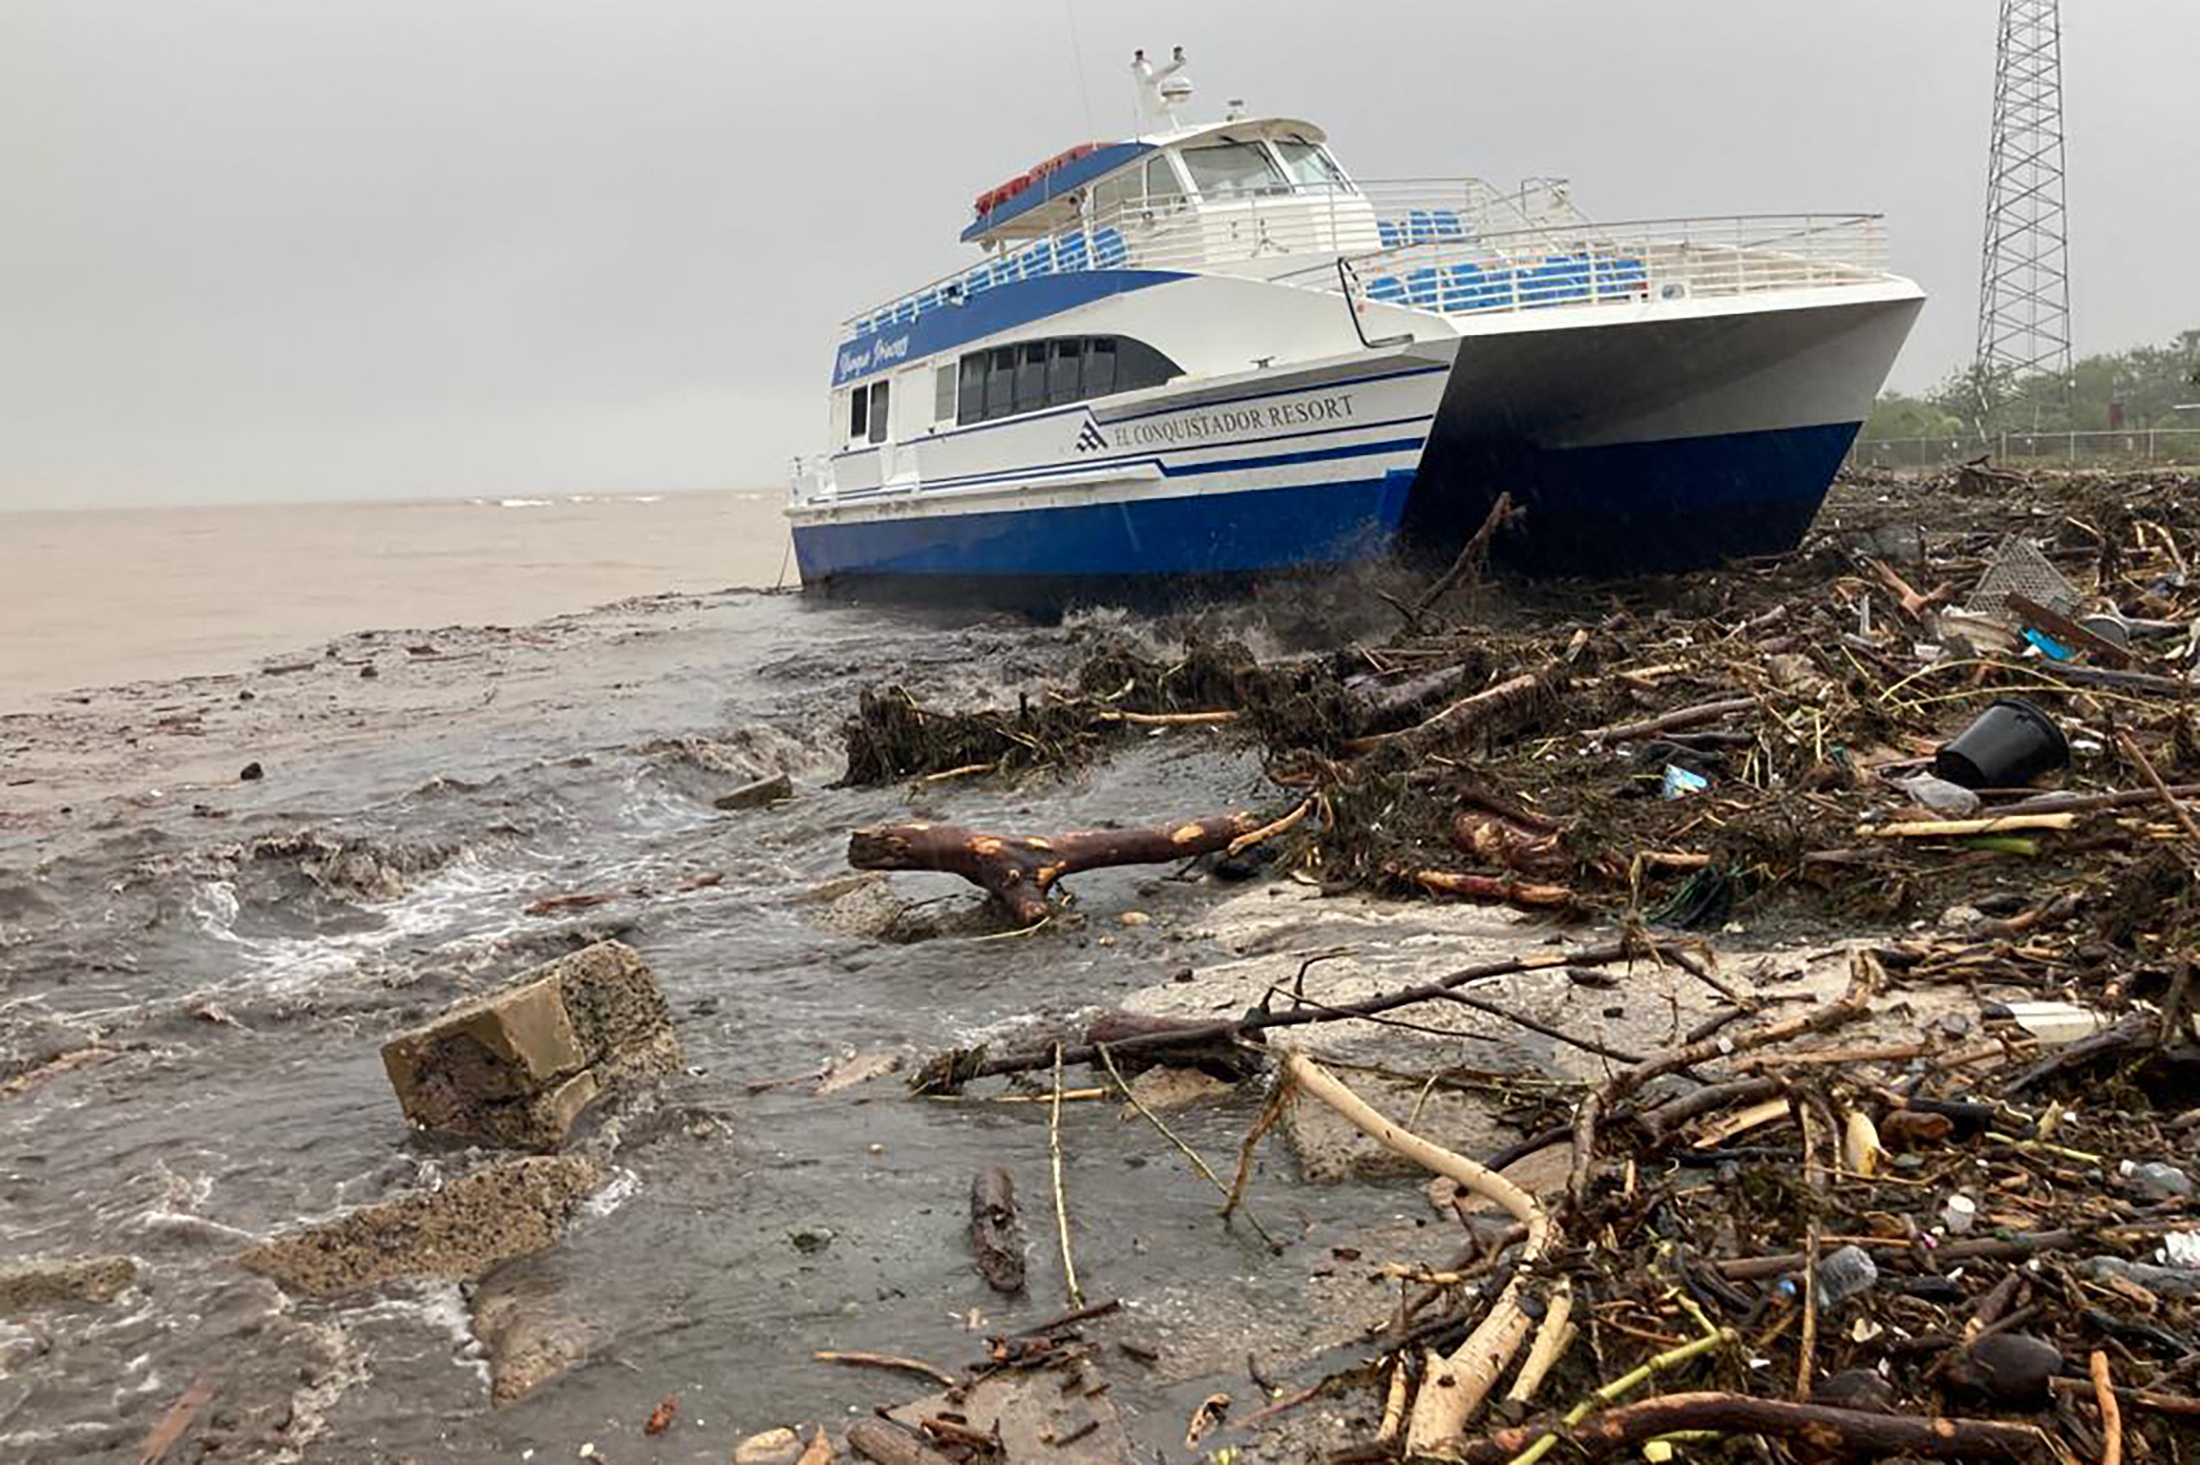 PHOTO: A boat lies washed up on shore after the passing of Hurricane Fiona in Ponce, Puerto Rico September 19, 2022.